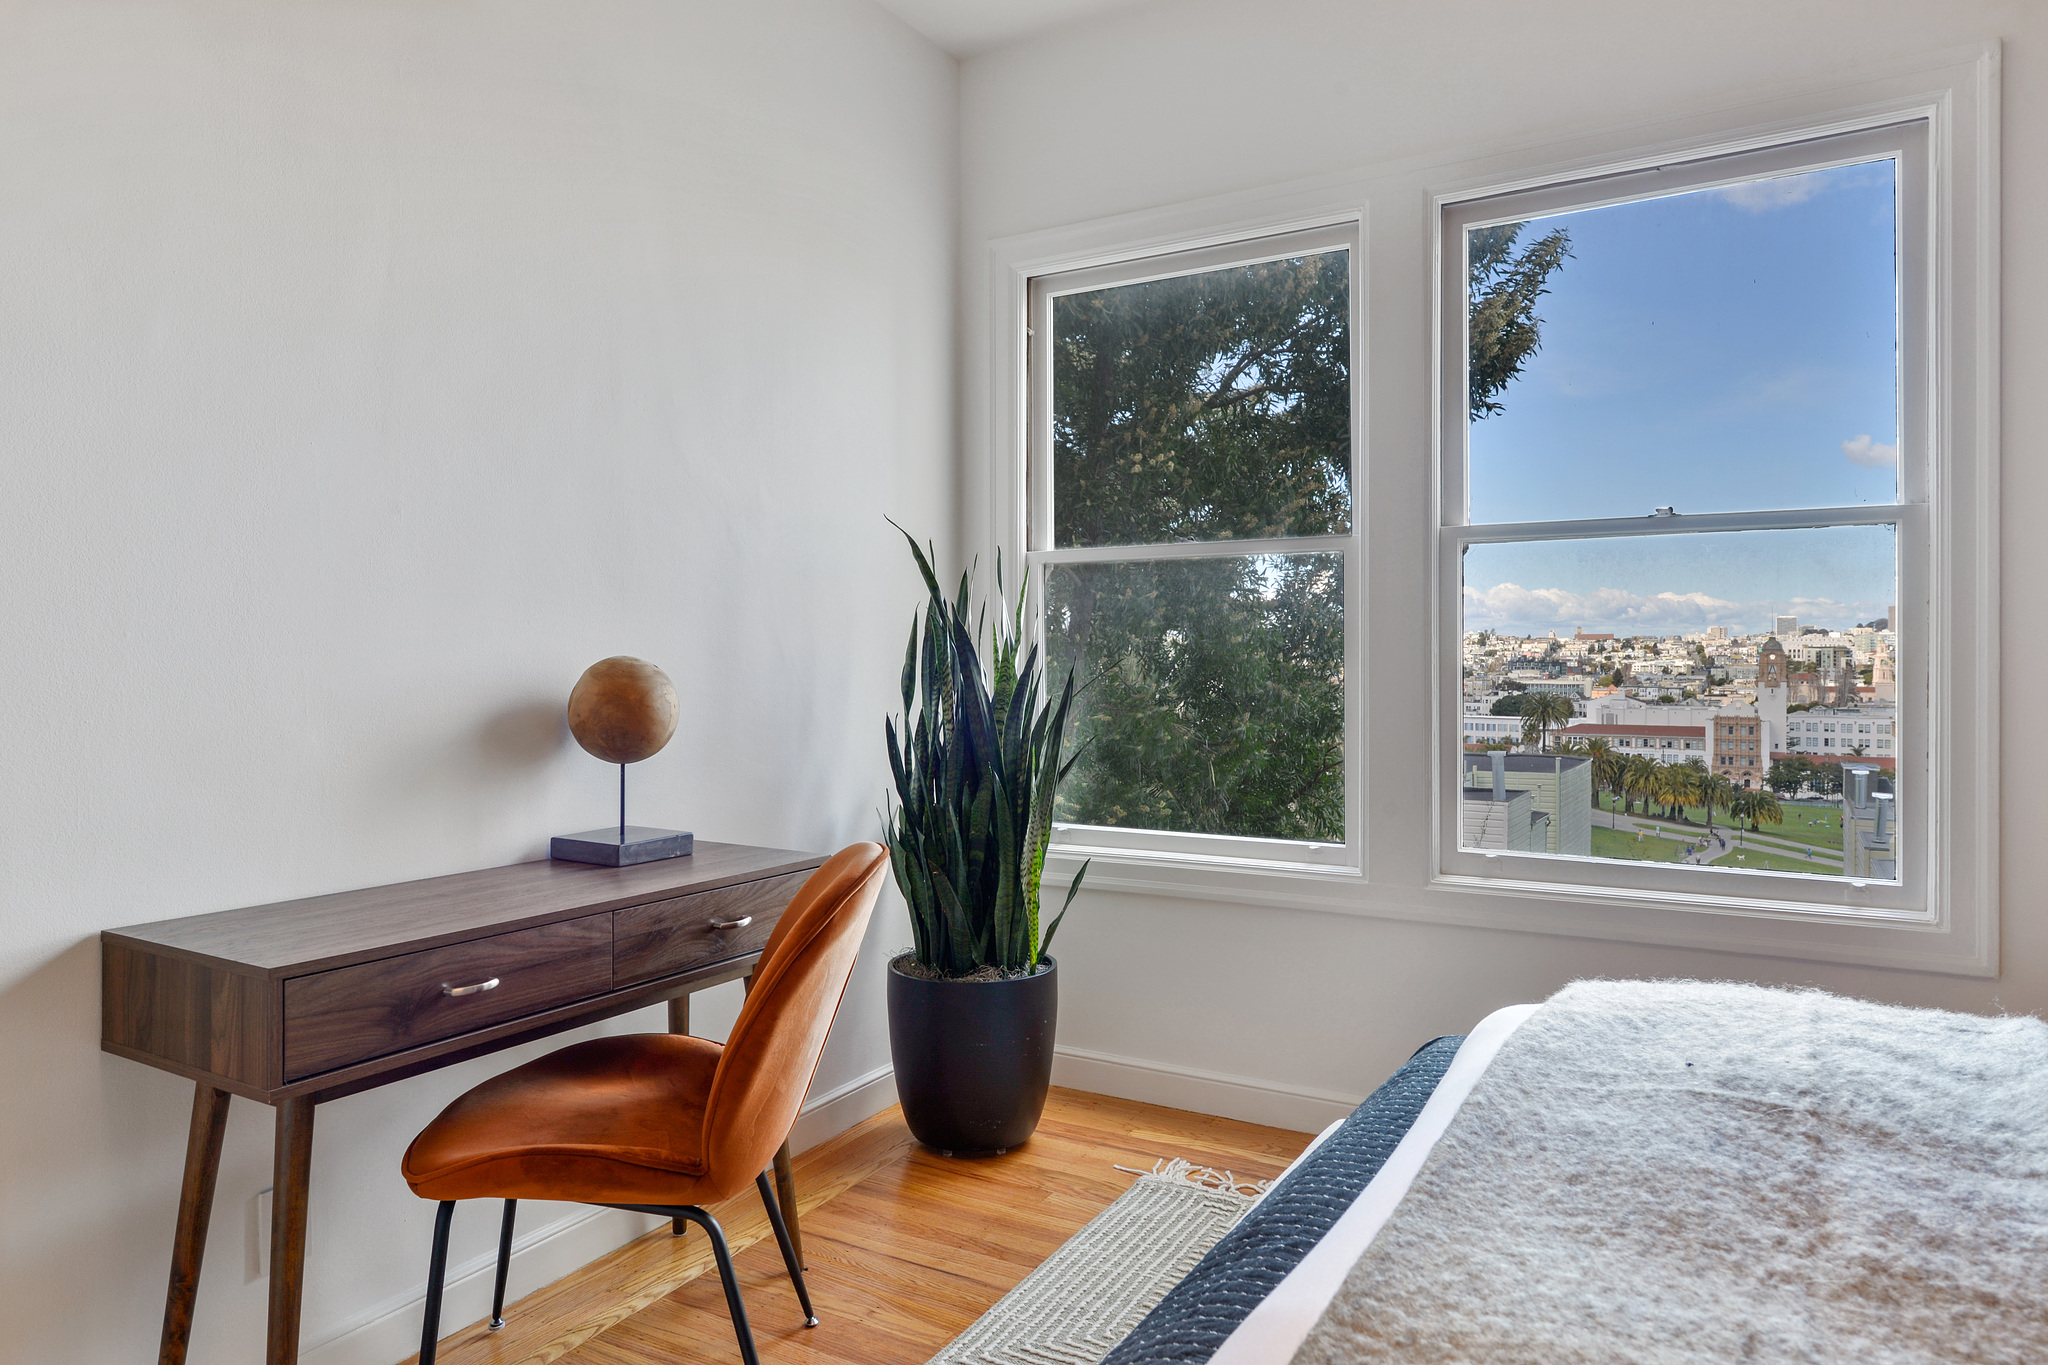 Property Photo: Bedroom windows with clear view of Delores Park and downtown San Francisco